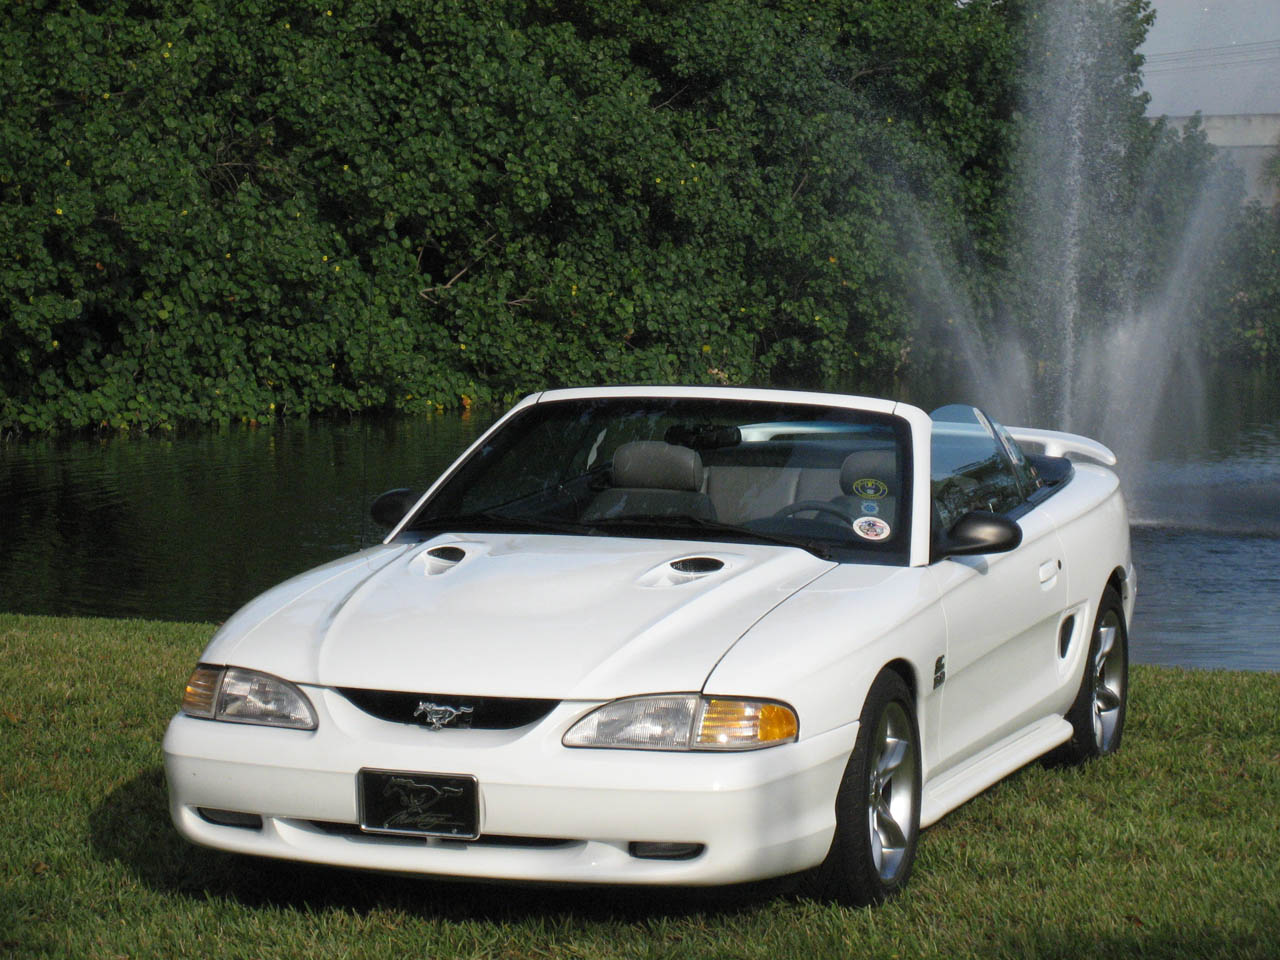  1994 Ford Mustang gt convertible ATI Supercharger